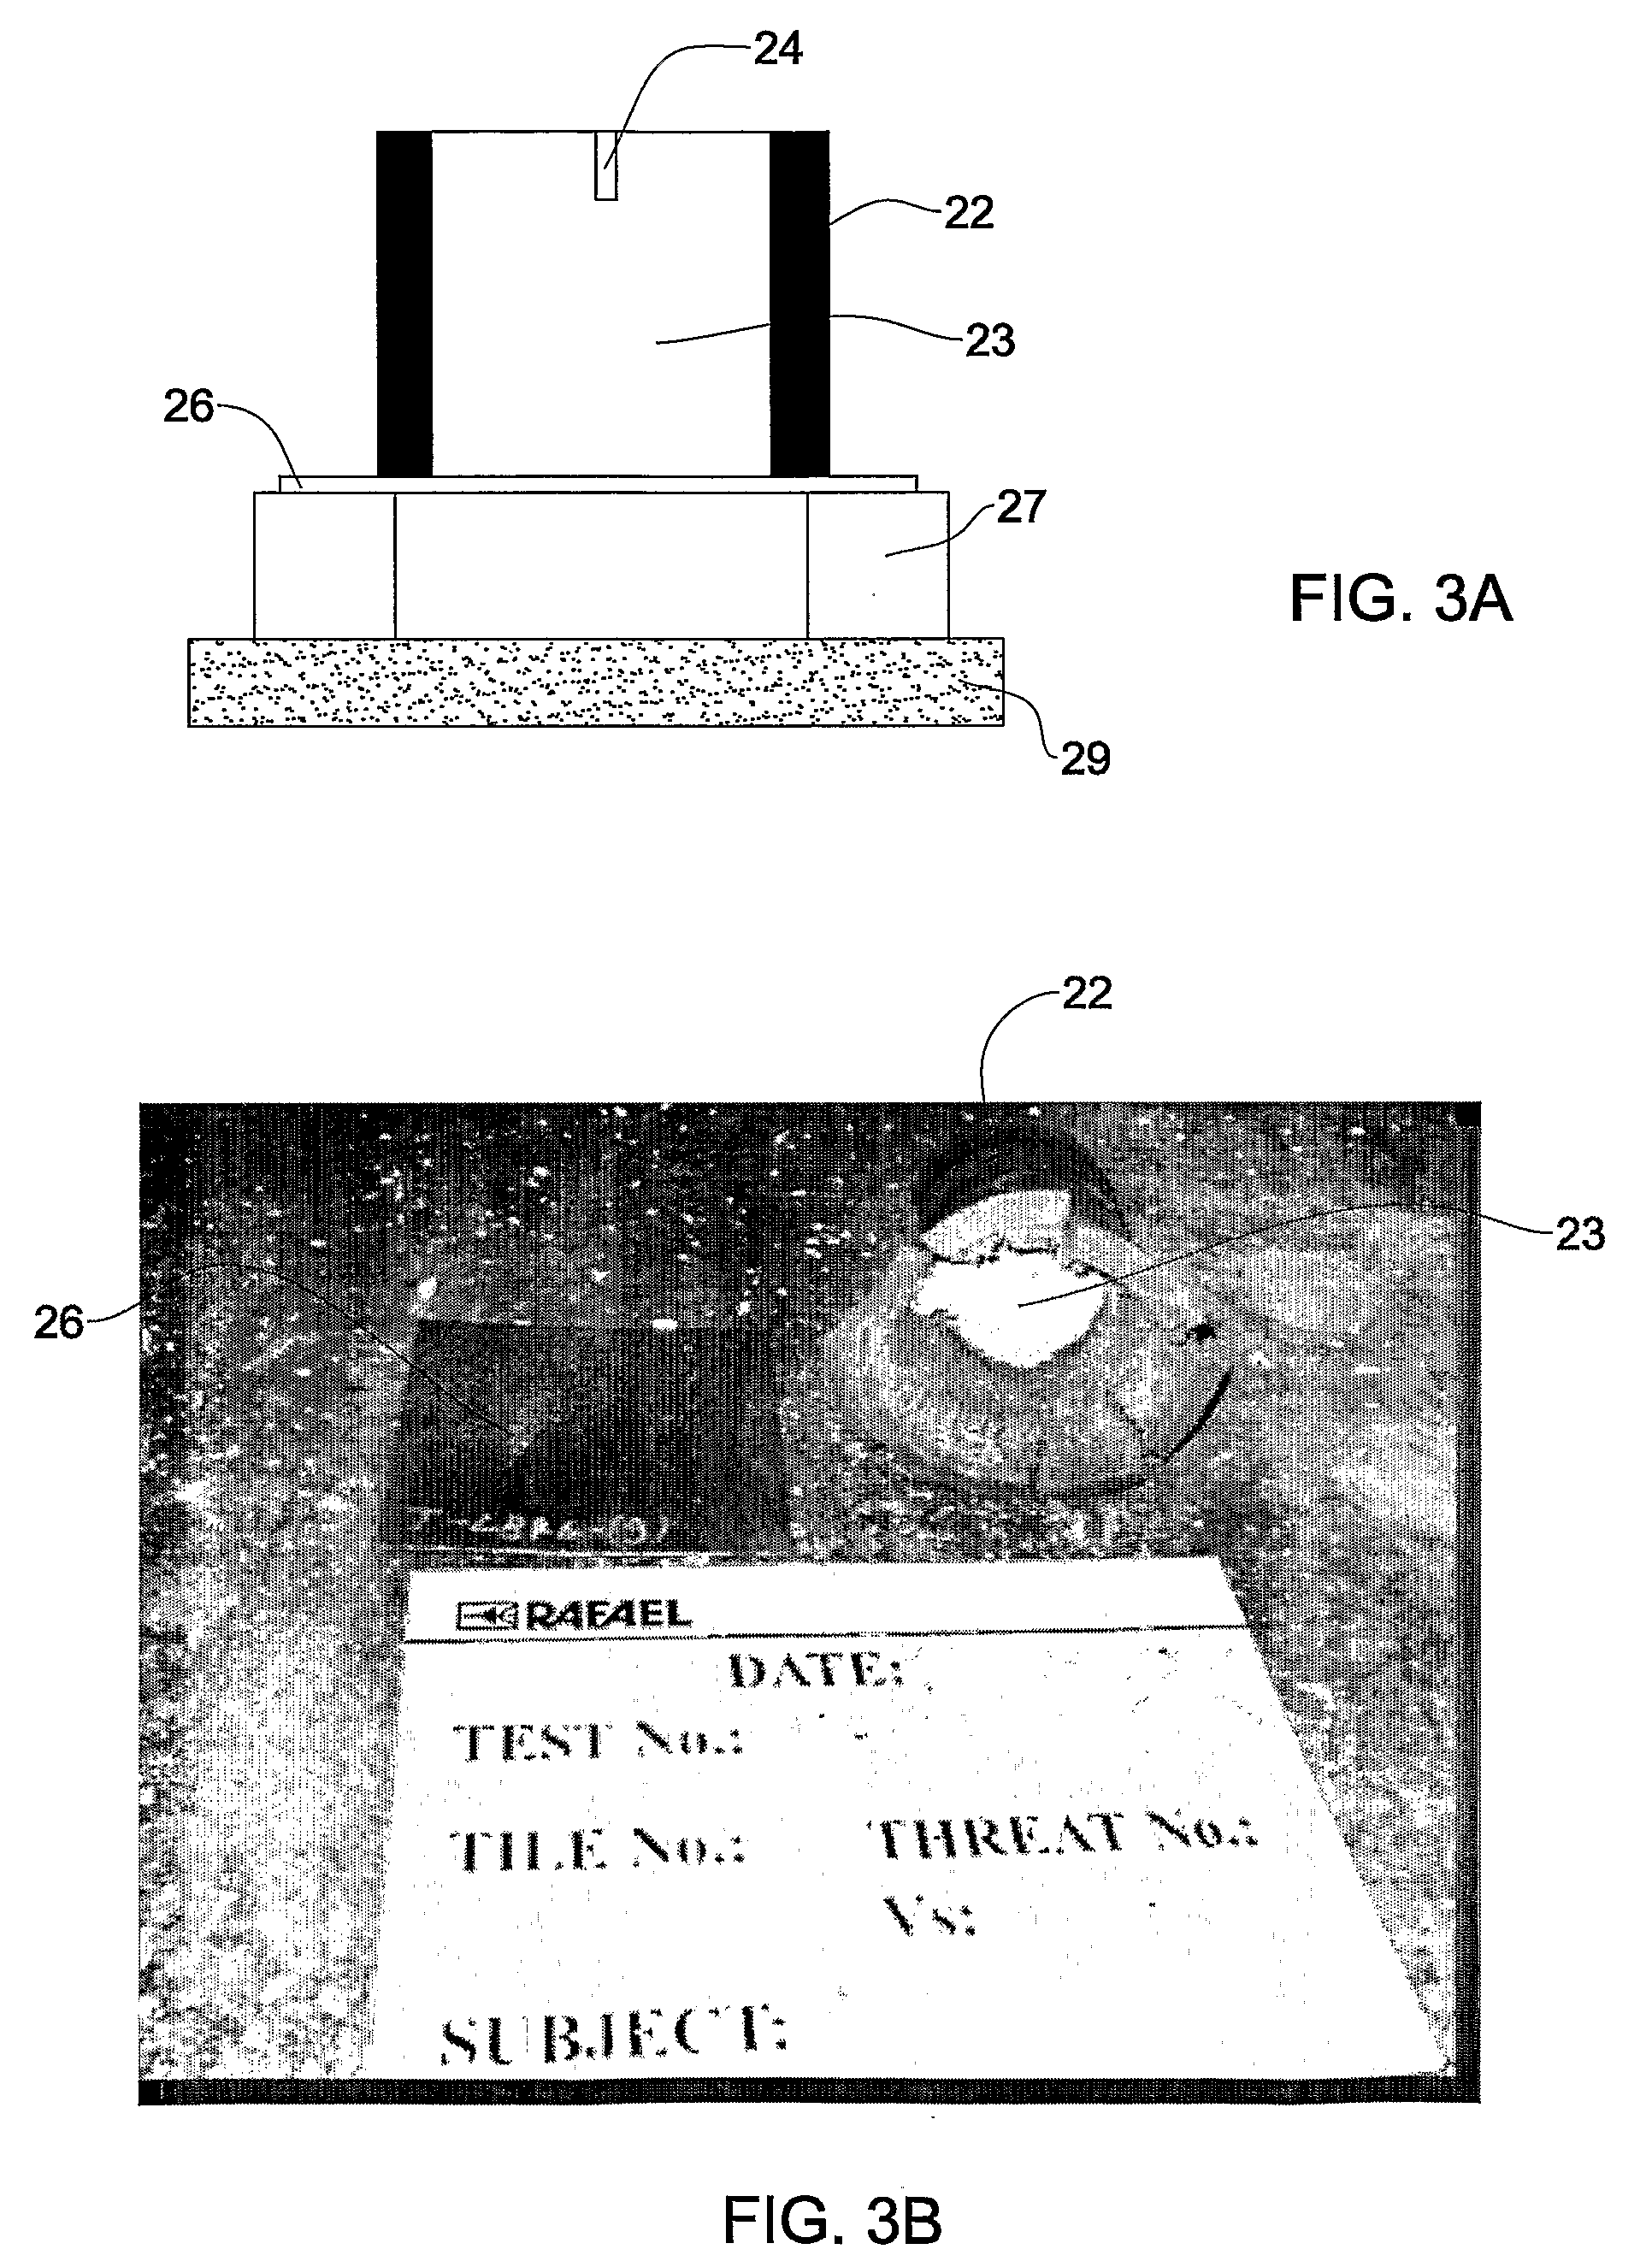 Extremely Insensitive Detonating Substance and Method for Its Manufacture